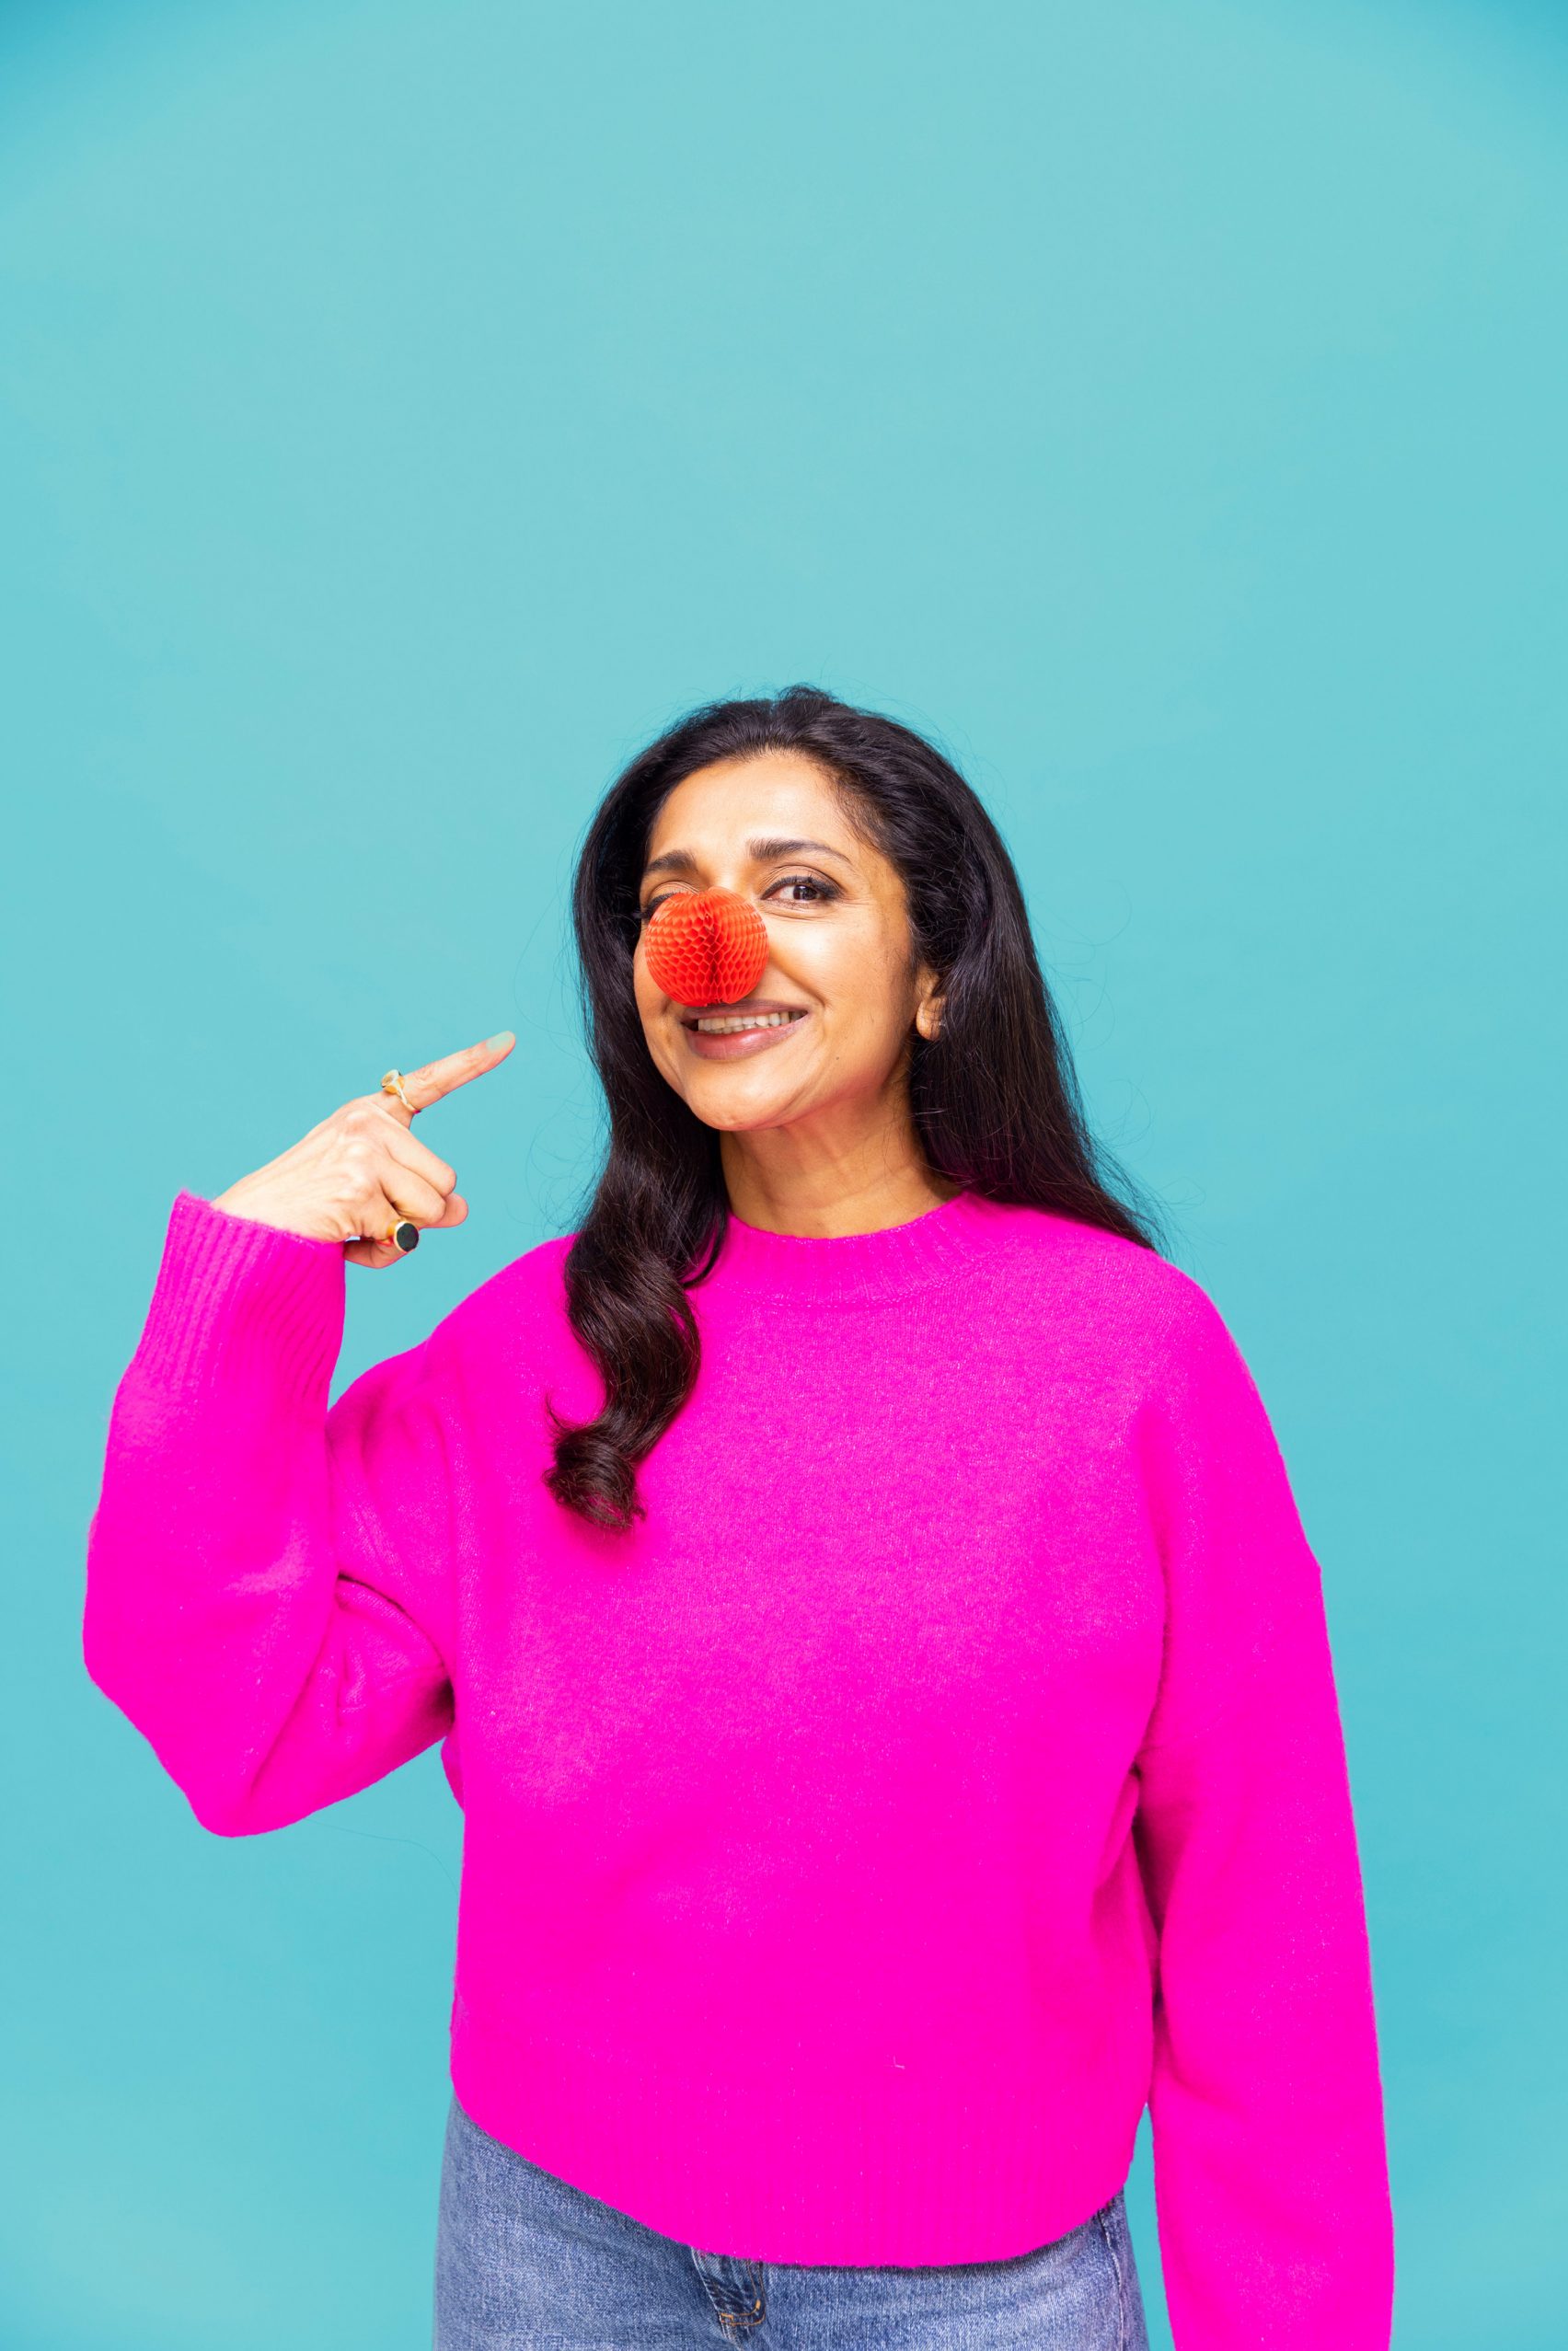 Photo of British actor Sindhu Vee proudly pointing to the Red Nose Day nose she is wearing